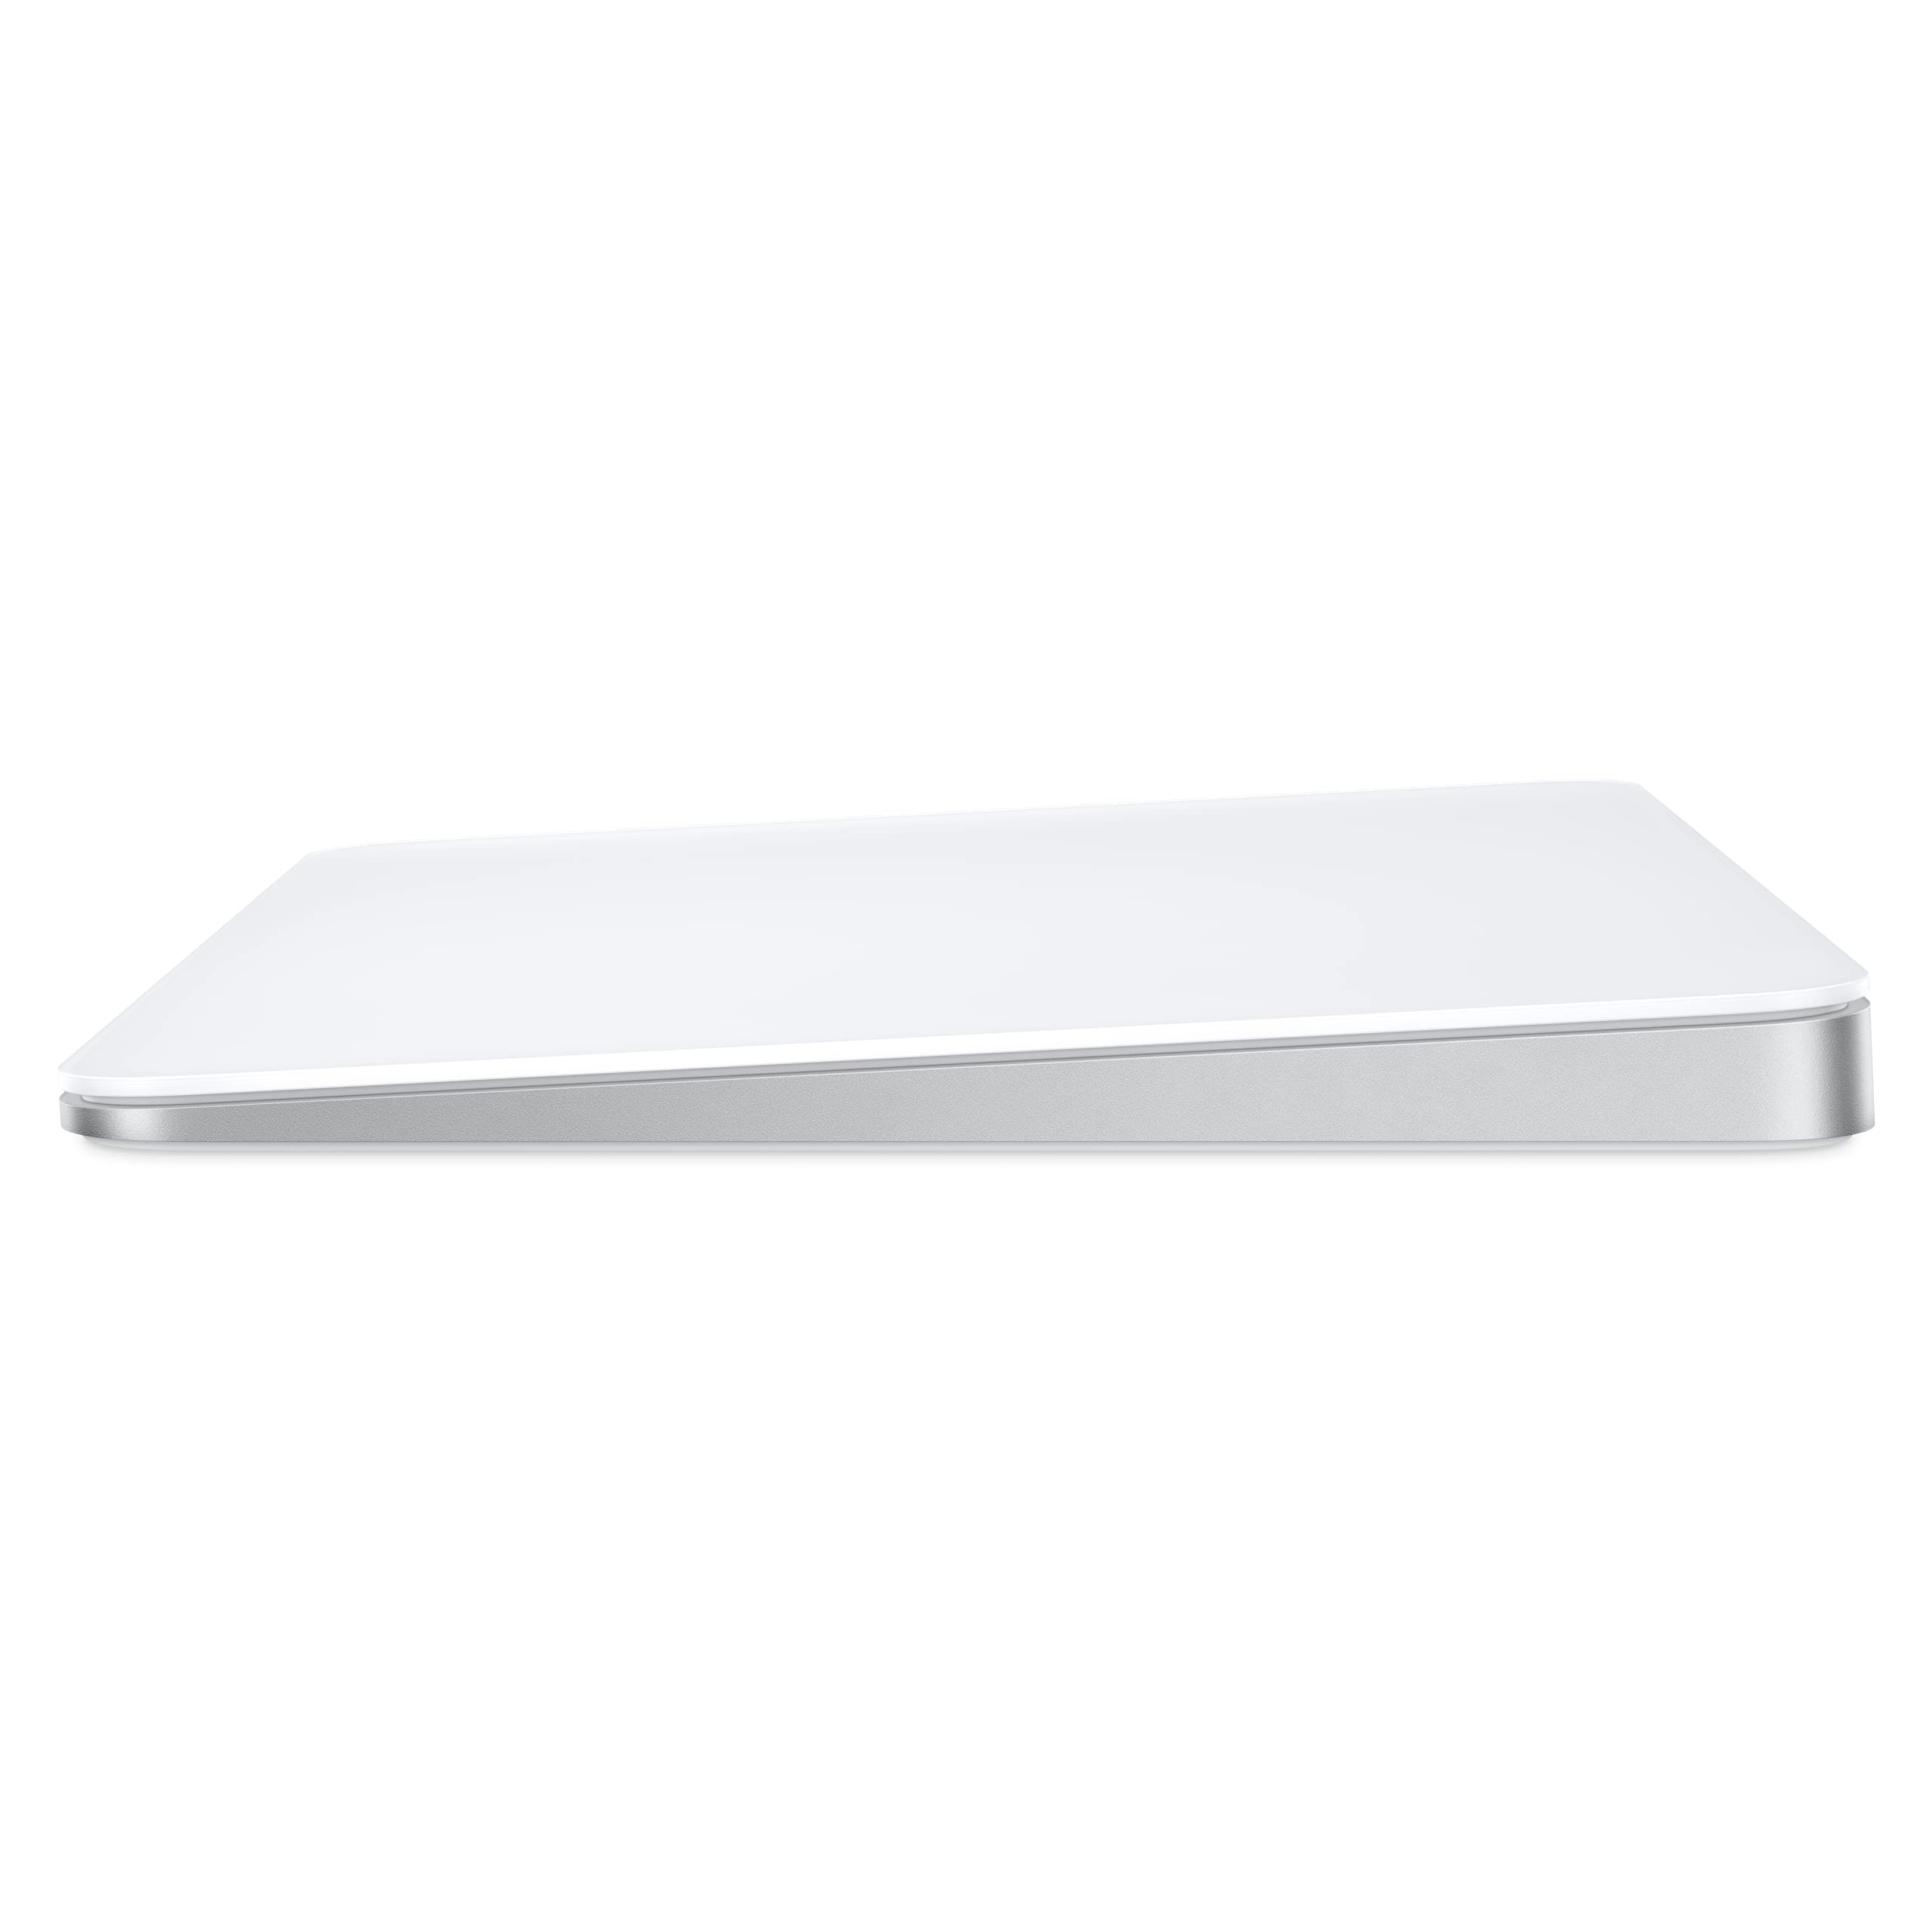 Apple Magic Trackpad: Wireless, Bluetooth, Rechargeable. Works with Mac or iPad; Multi-Touch Surface - White